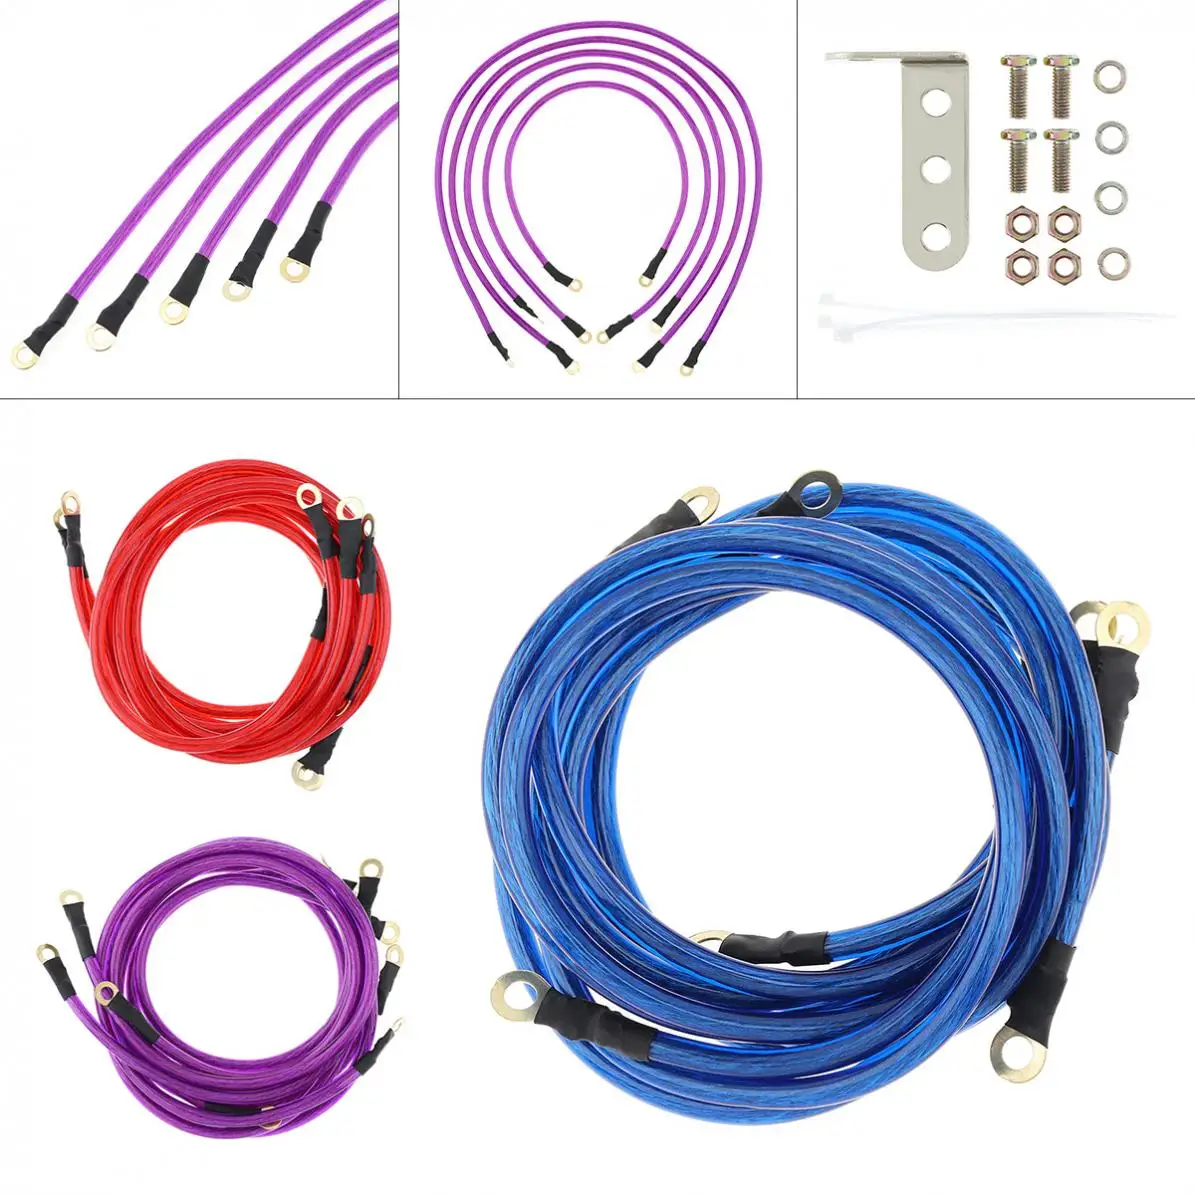 

5 Point Car Universal Earth Ground Cables Grounding Wire System Kit High Performance Improve Power